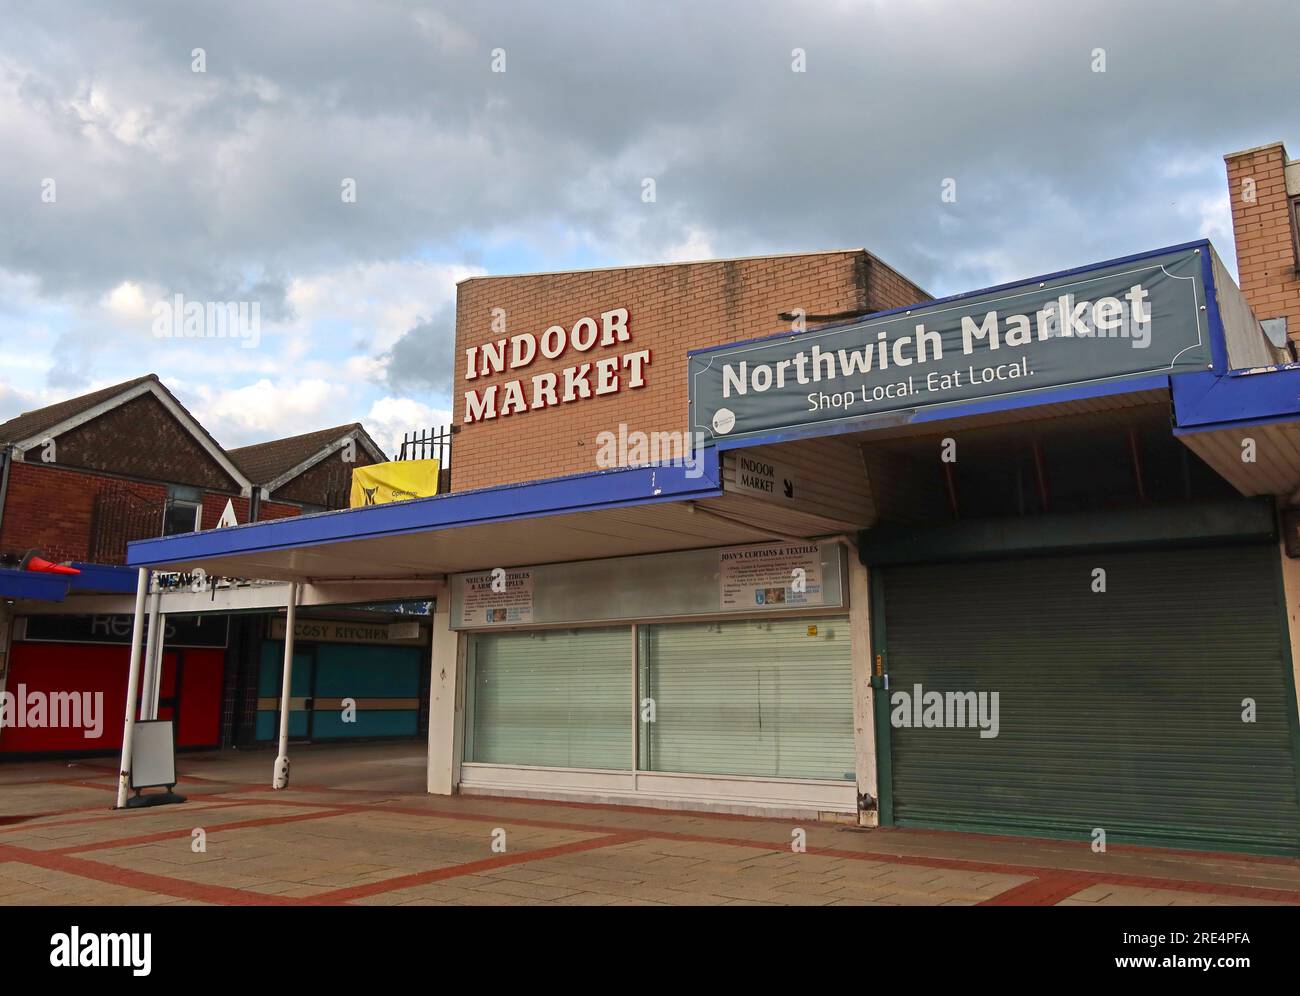 Entrance to Northwich Indoor Market, shop local , Eat local at Apple Market St, Weaver Square shopping area, Cheshire, England, UK, CW9 5BB Stock Photo